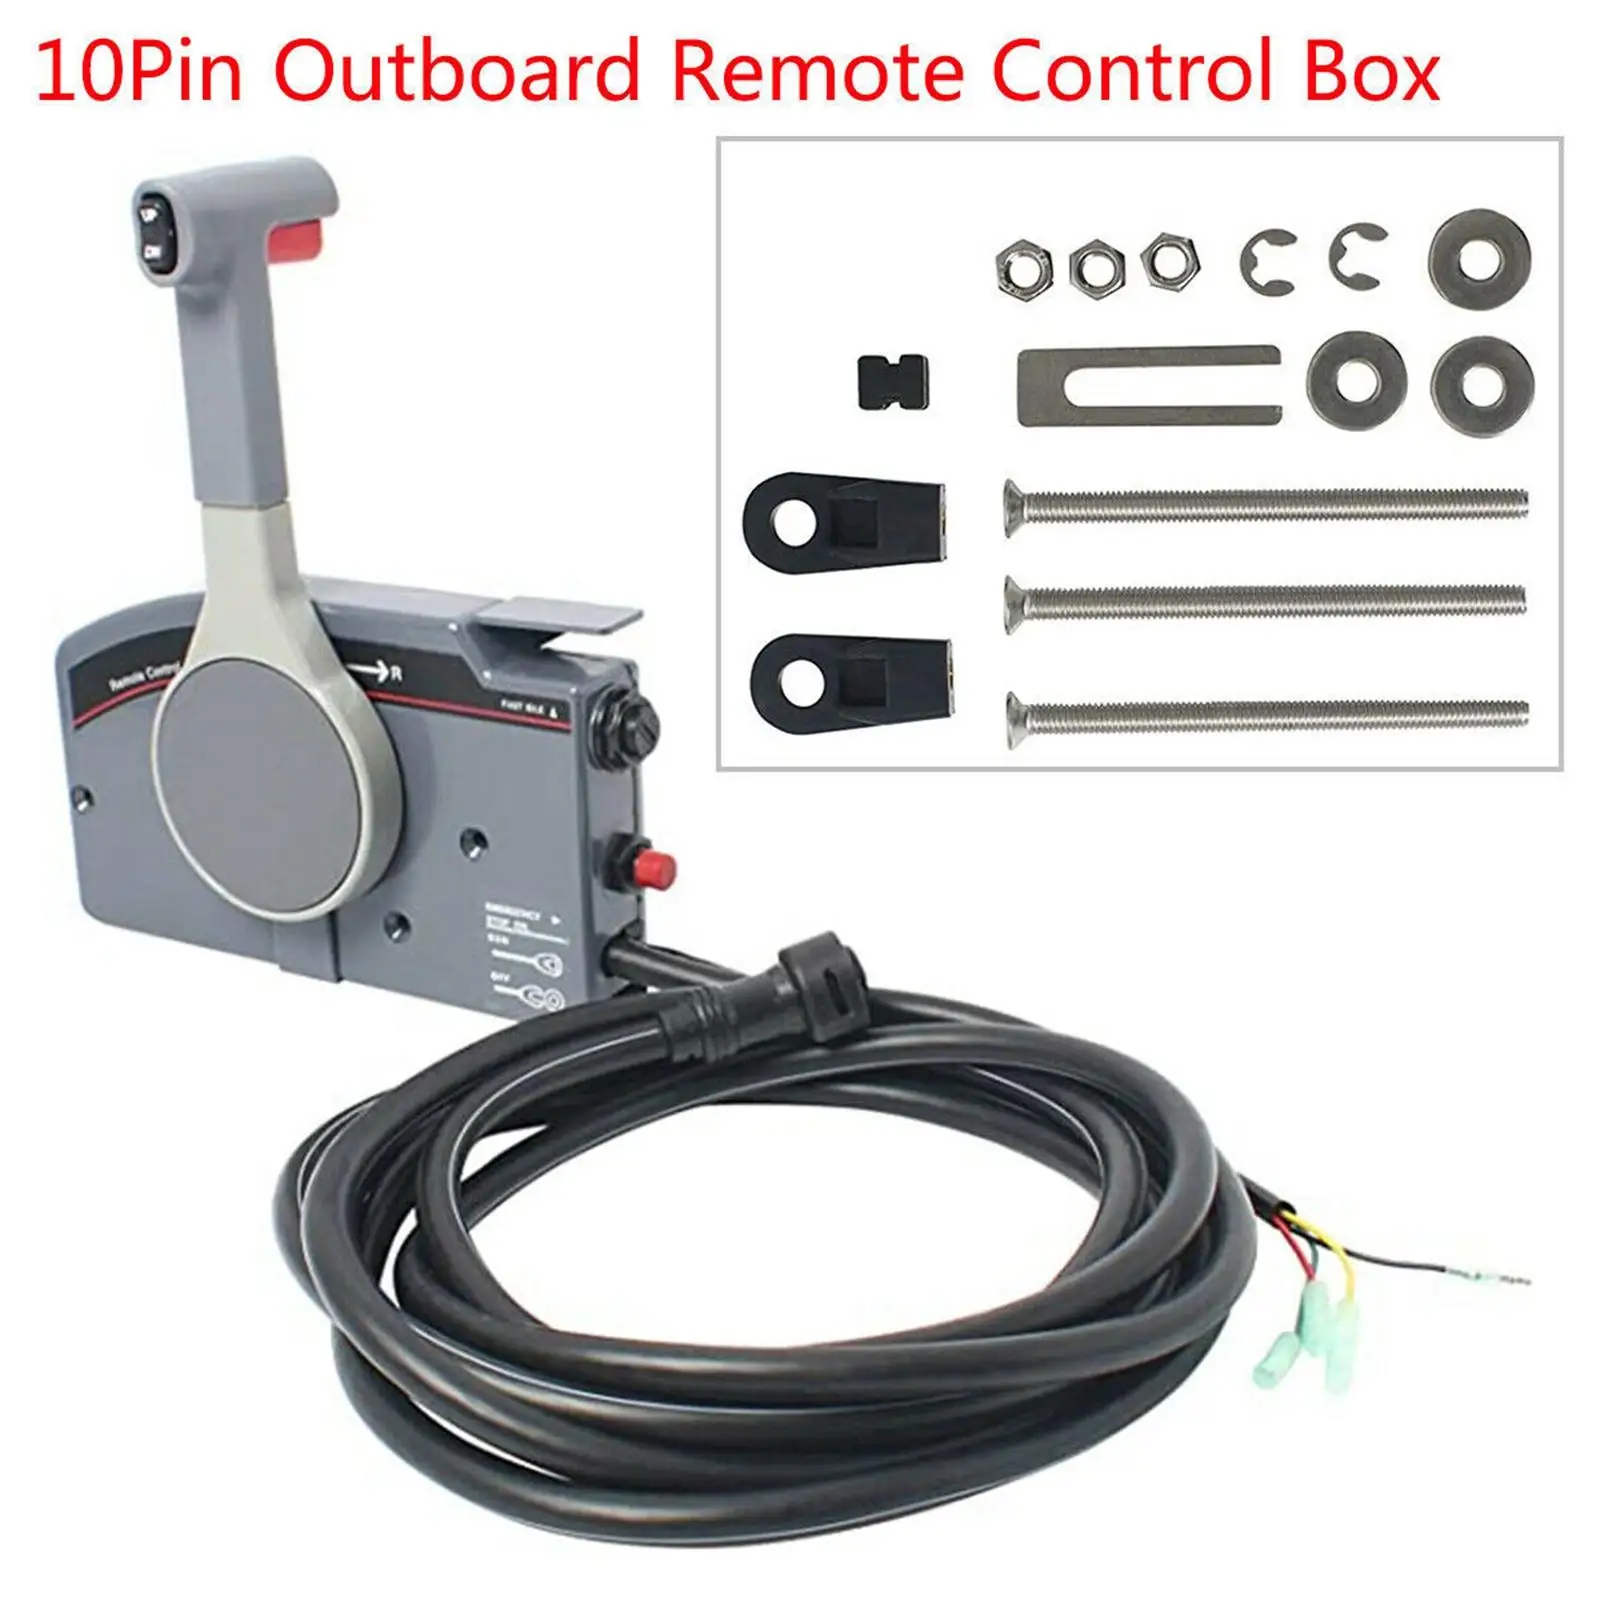 10Pin Outboard Remote Control Box Fits for Boat Engines